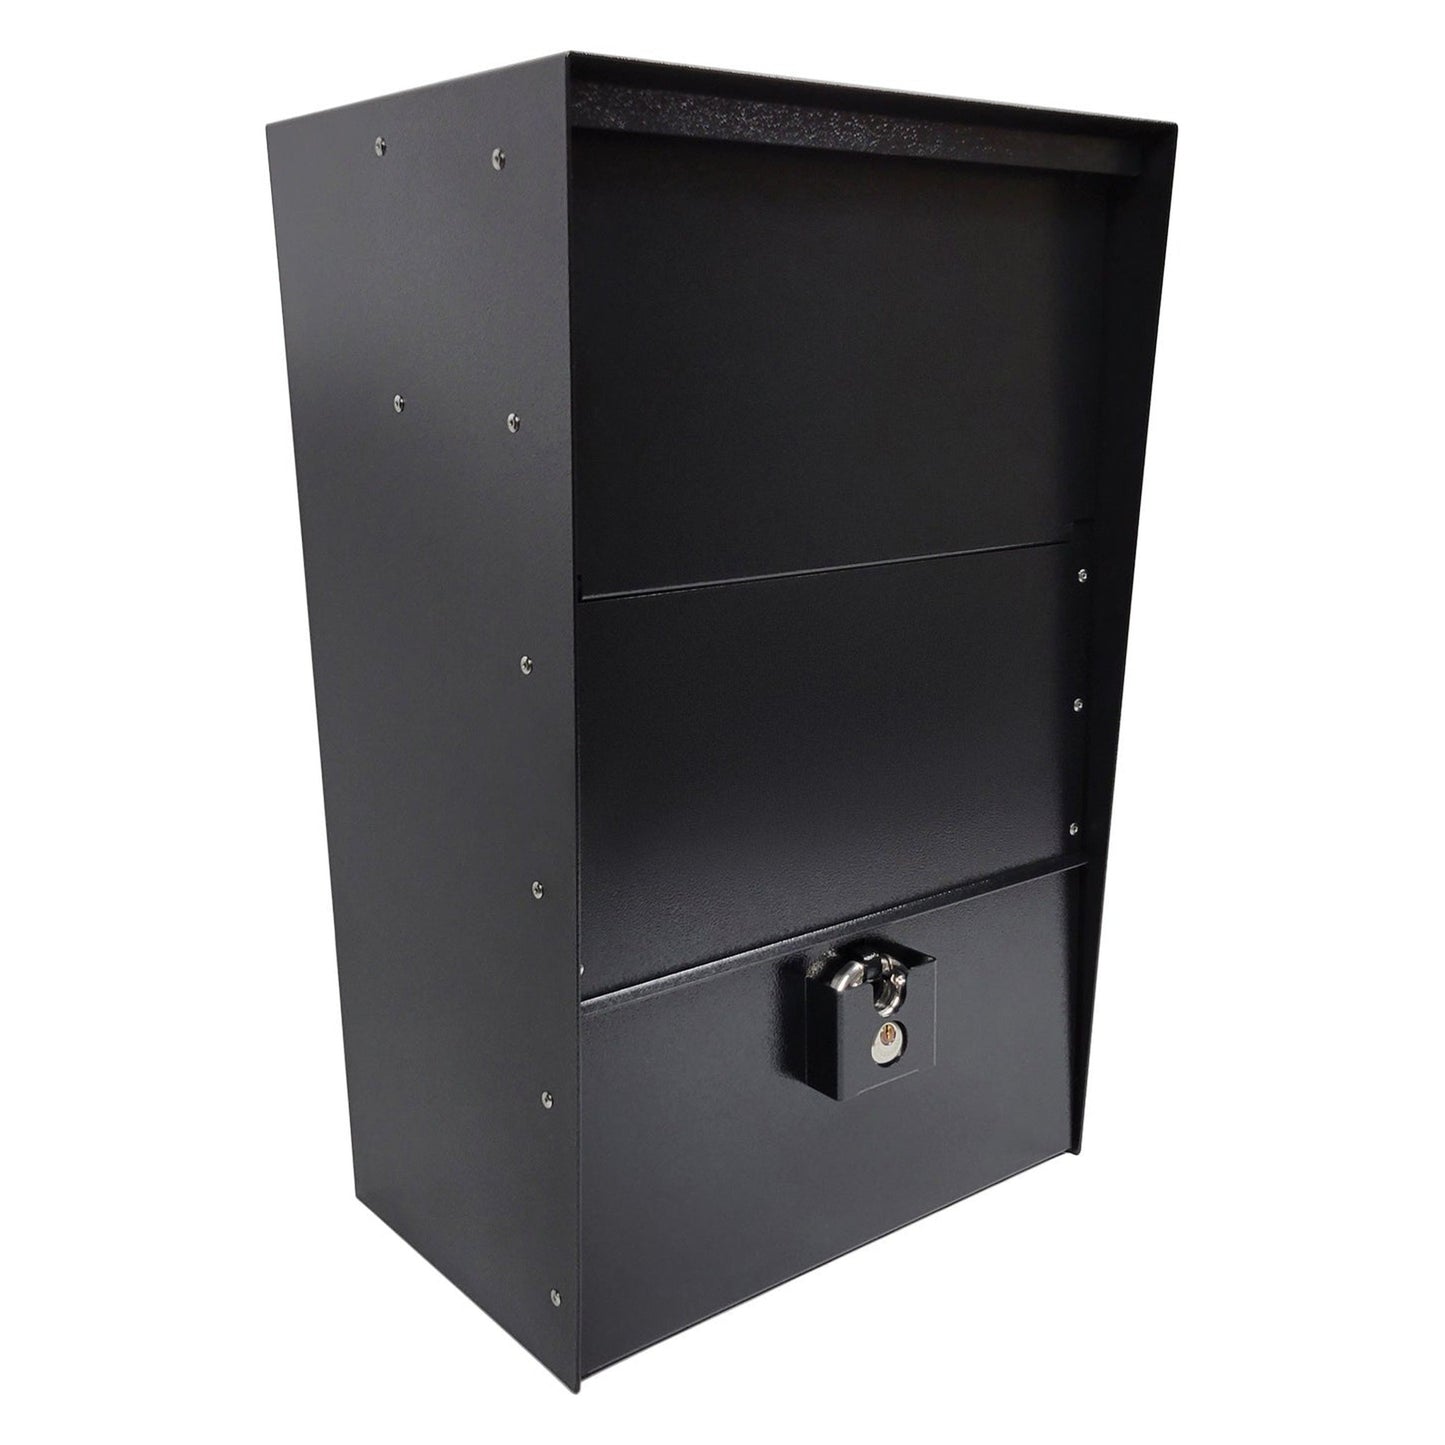 Deluxe Self-Contained Night Drop Box (Unprinted)